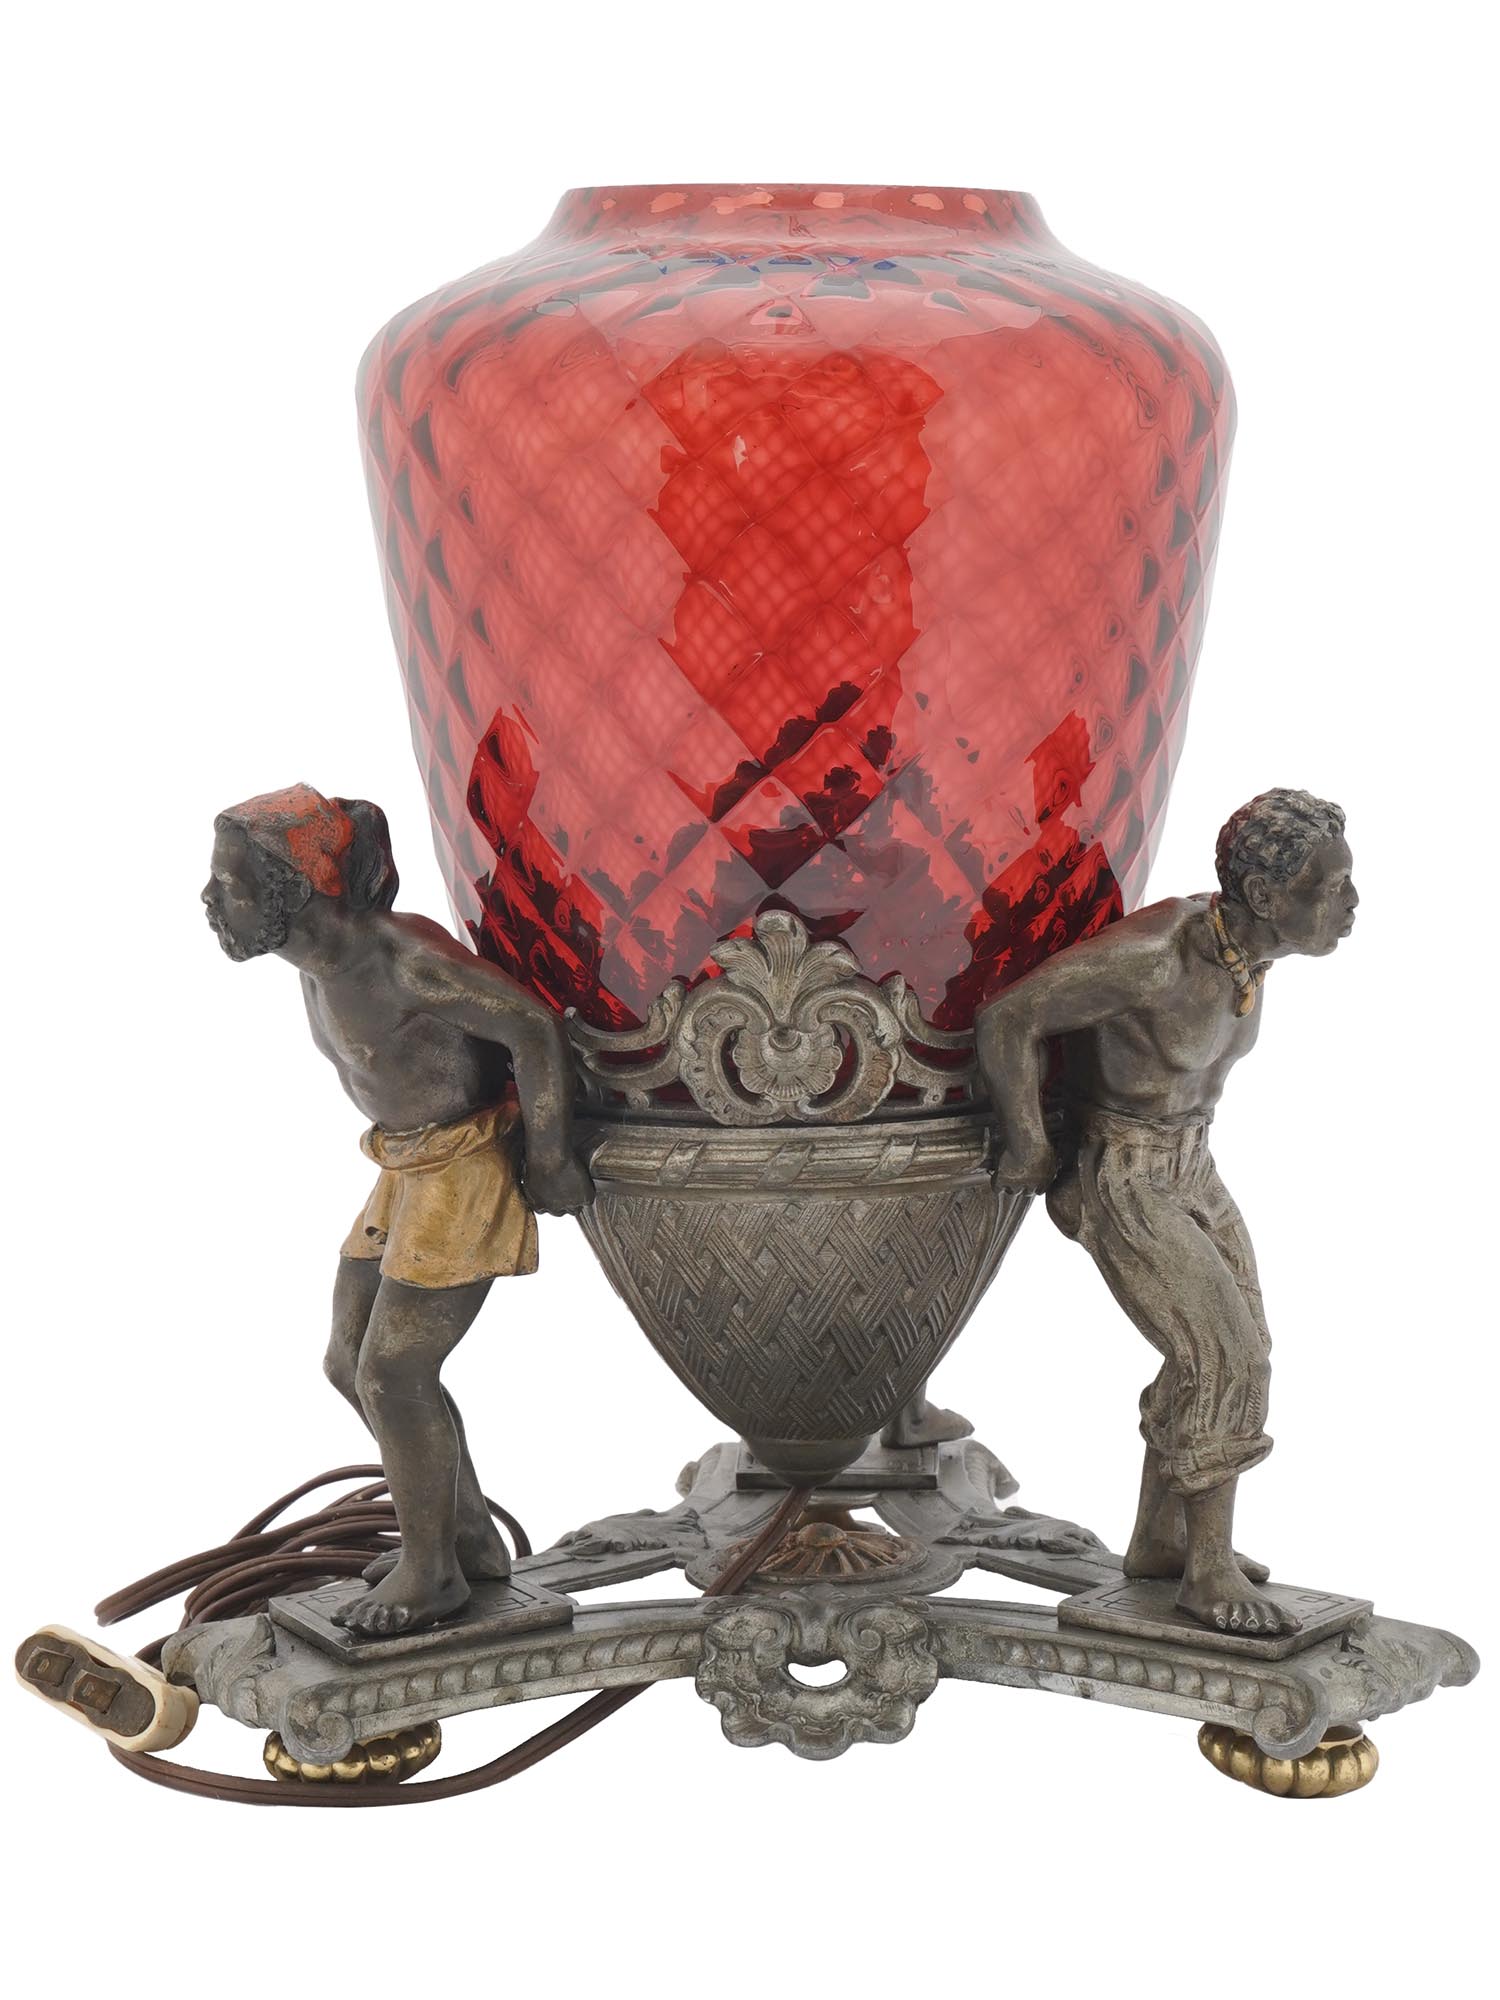 ANTIQUE ART DECO RED GLASS ELECTRIC TABLE LAMP PIC-2